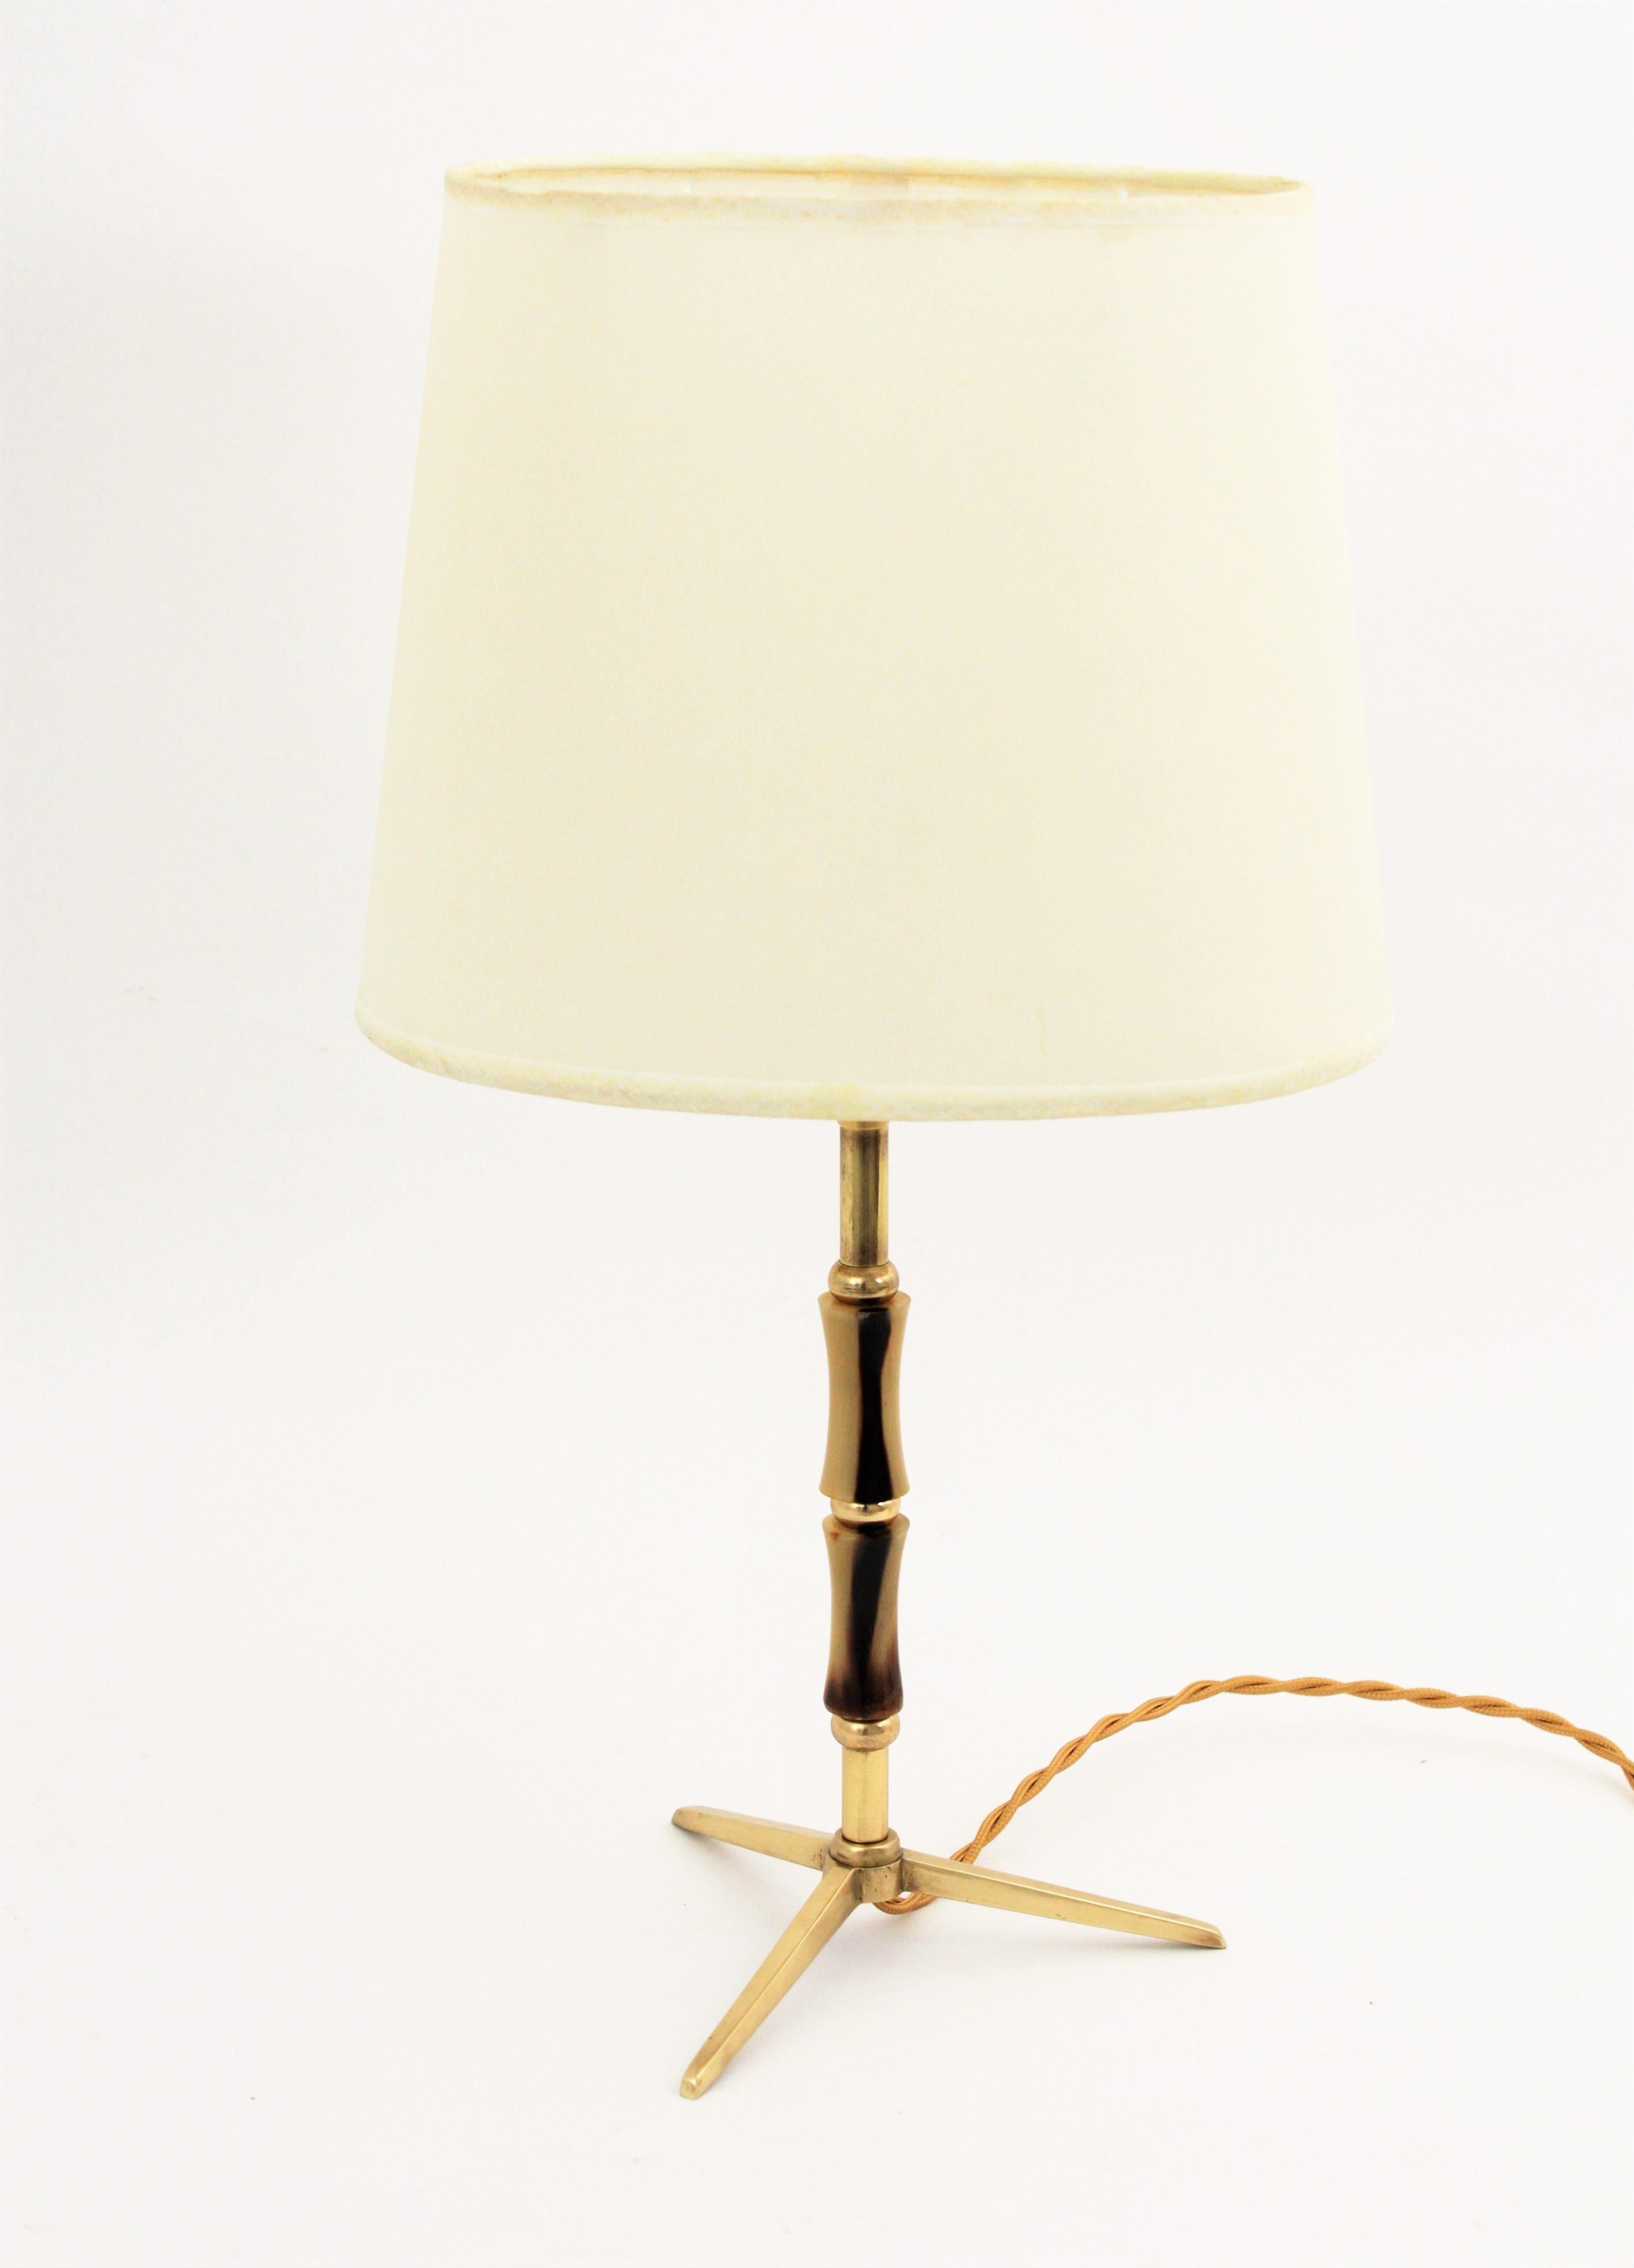 A brass tripod table lamp accented by acrylic details attributed to Jacques Adnet, France, 1950s.
This elegant table lamp is ornamented by faux bamboo details made of acrylic cylindrical pieces and brass rings. It wears its original shade that is in